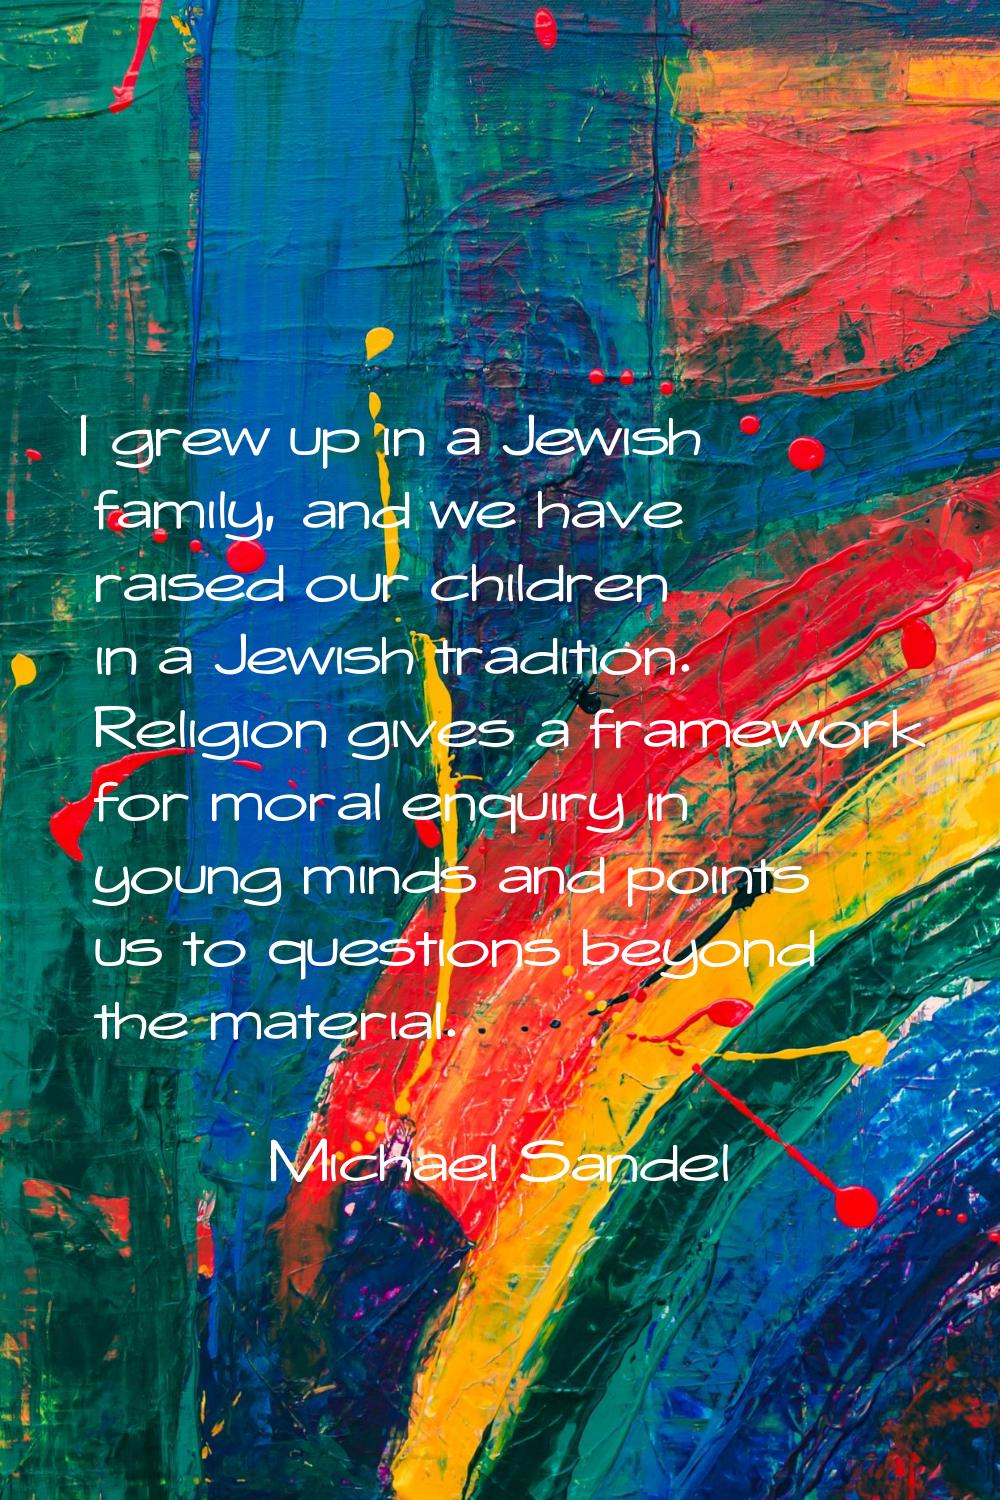 I grew up in a Jewish family, and we have raised our children in a Jewish tradition. Religion gives